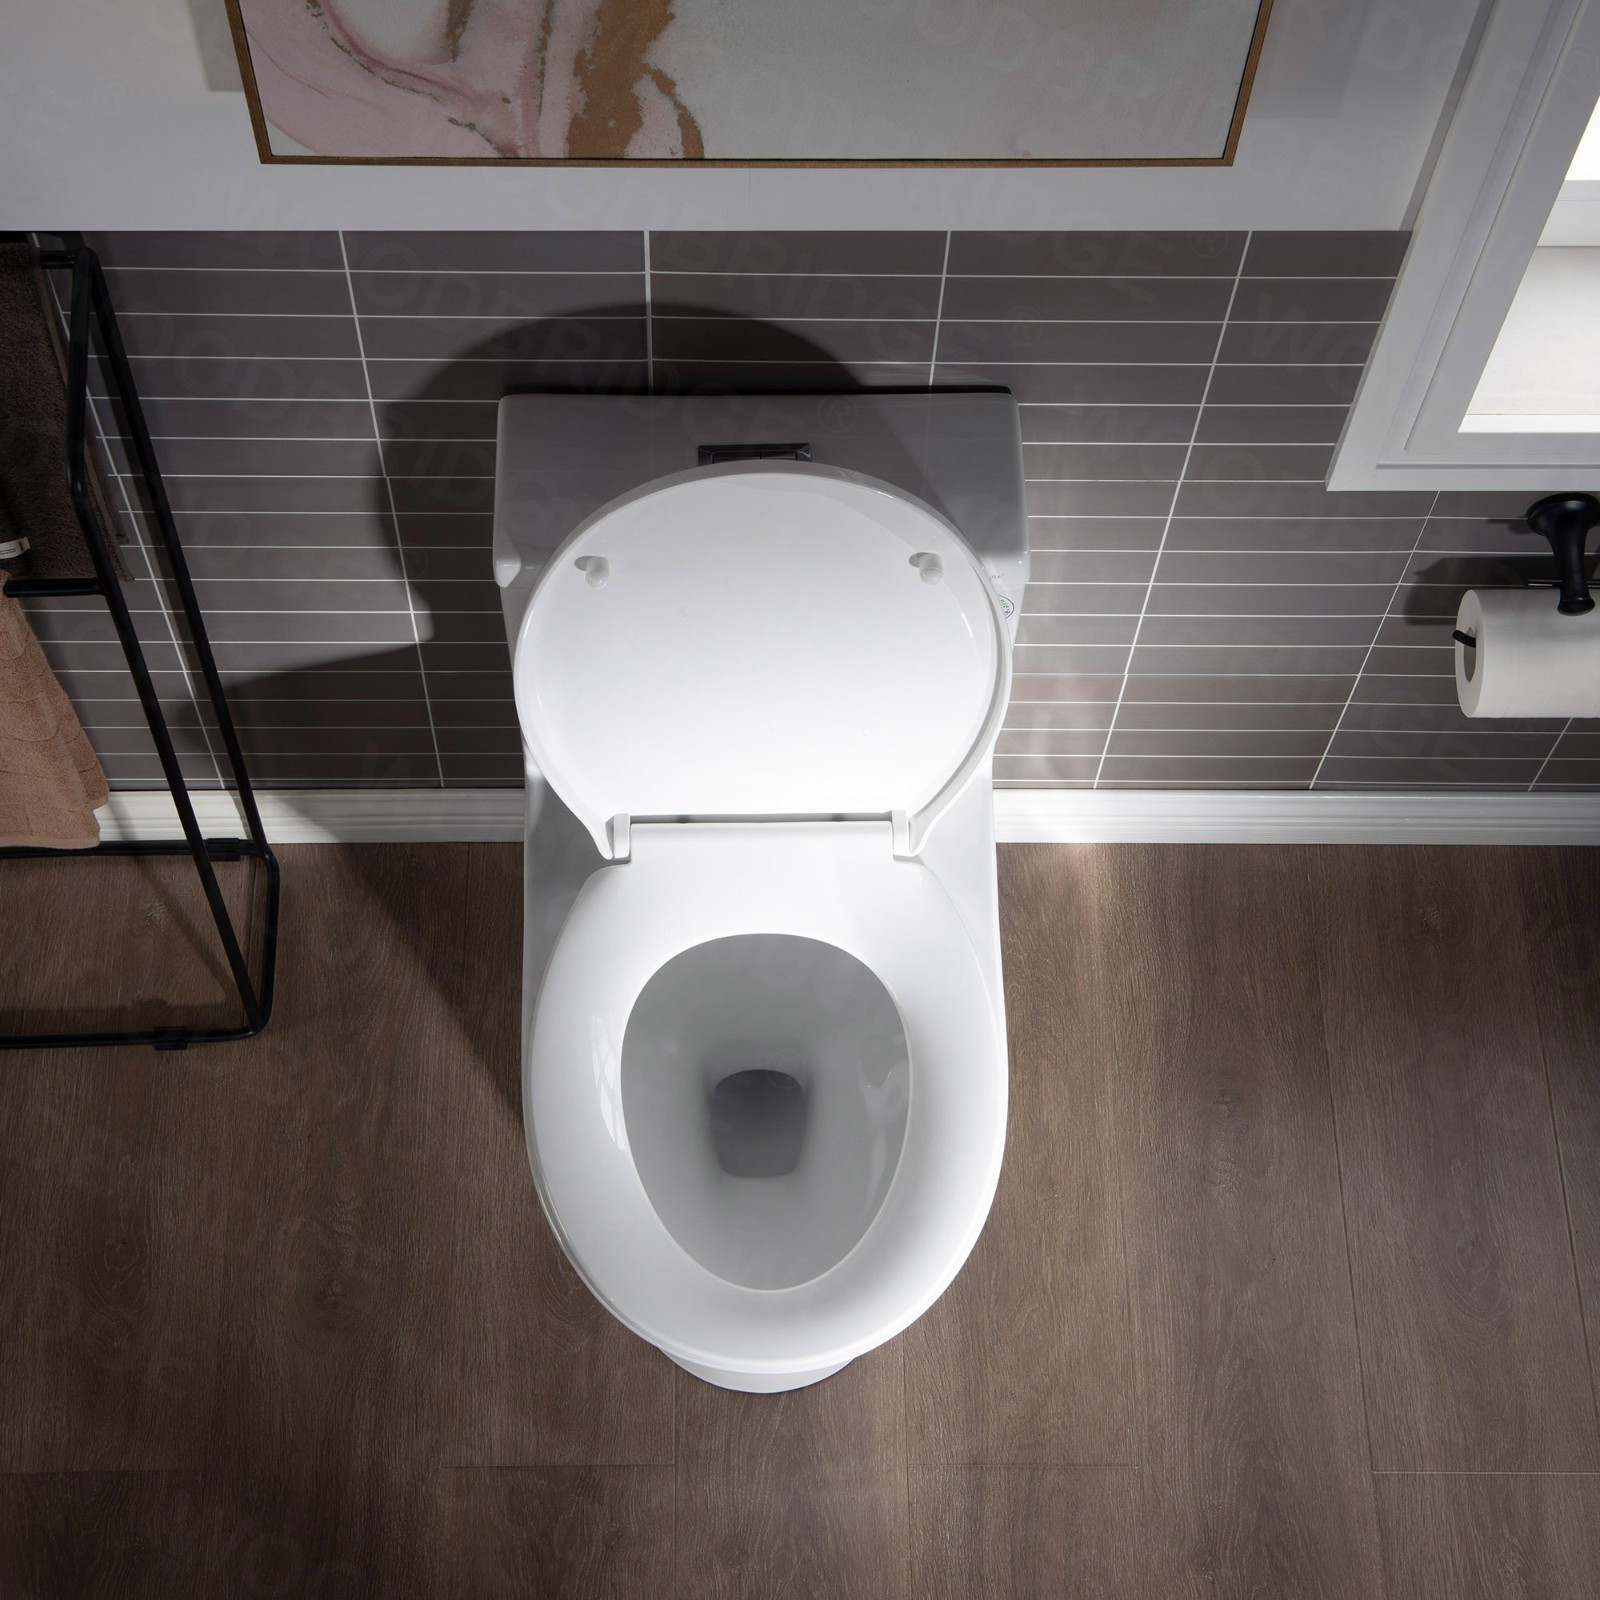  WOODBRIDGE B-0500-A Modern One-Piece Elongated toilet with Solf Closed Seat and Hand Free Touchless Sensor Flush Kit, White_5488